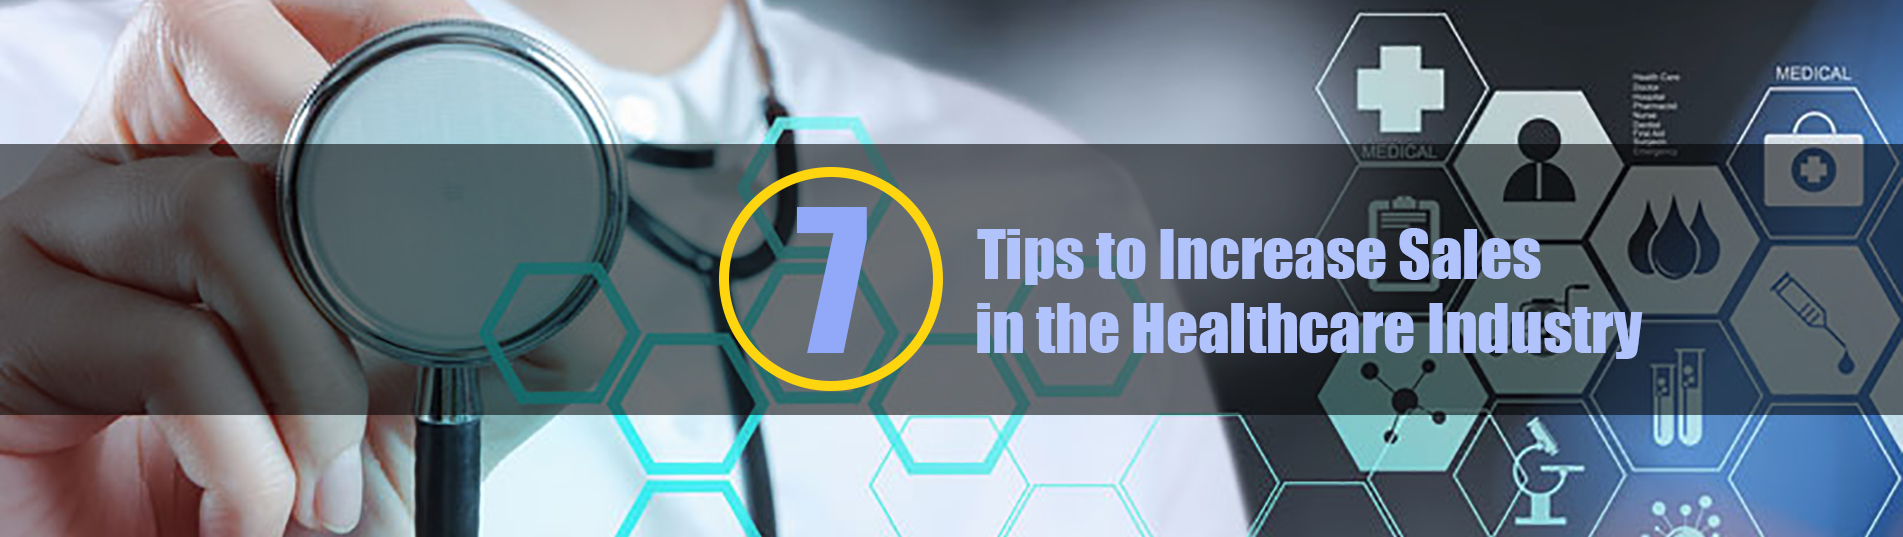 7 Tips to Increase Sales in the Healthcare Industry